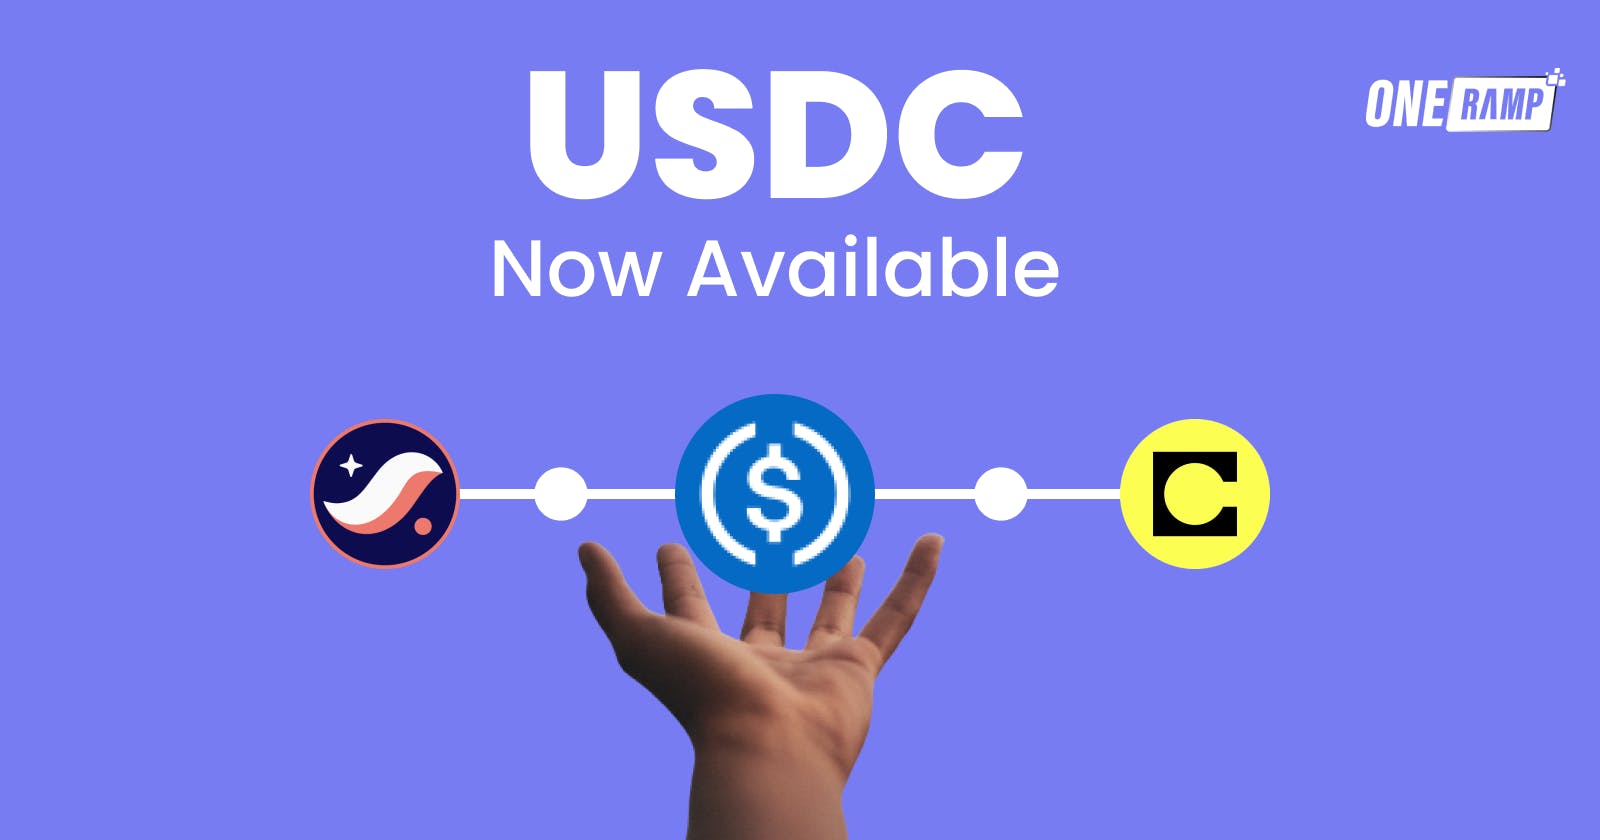 Oneramp Embraces USDC on Celo and Starknet